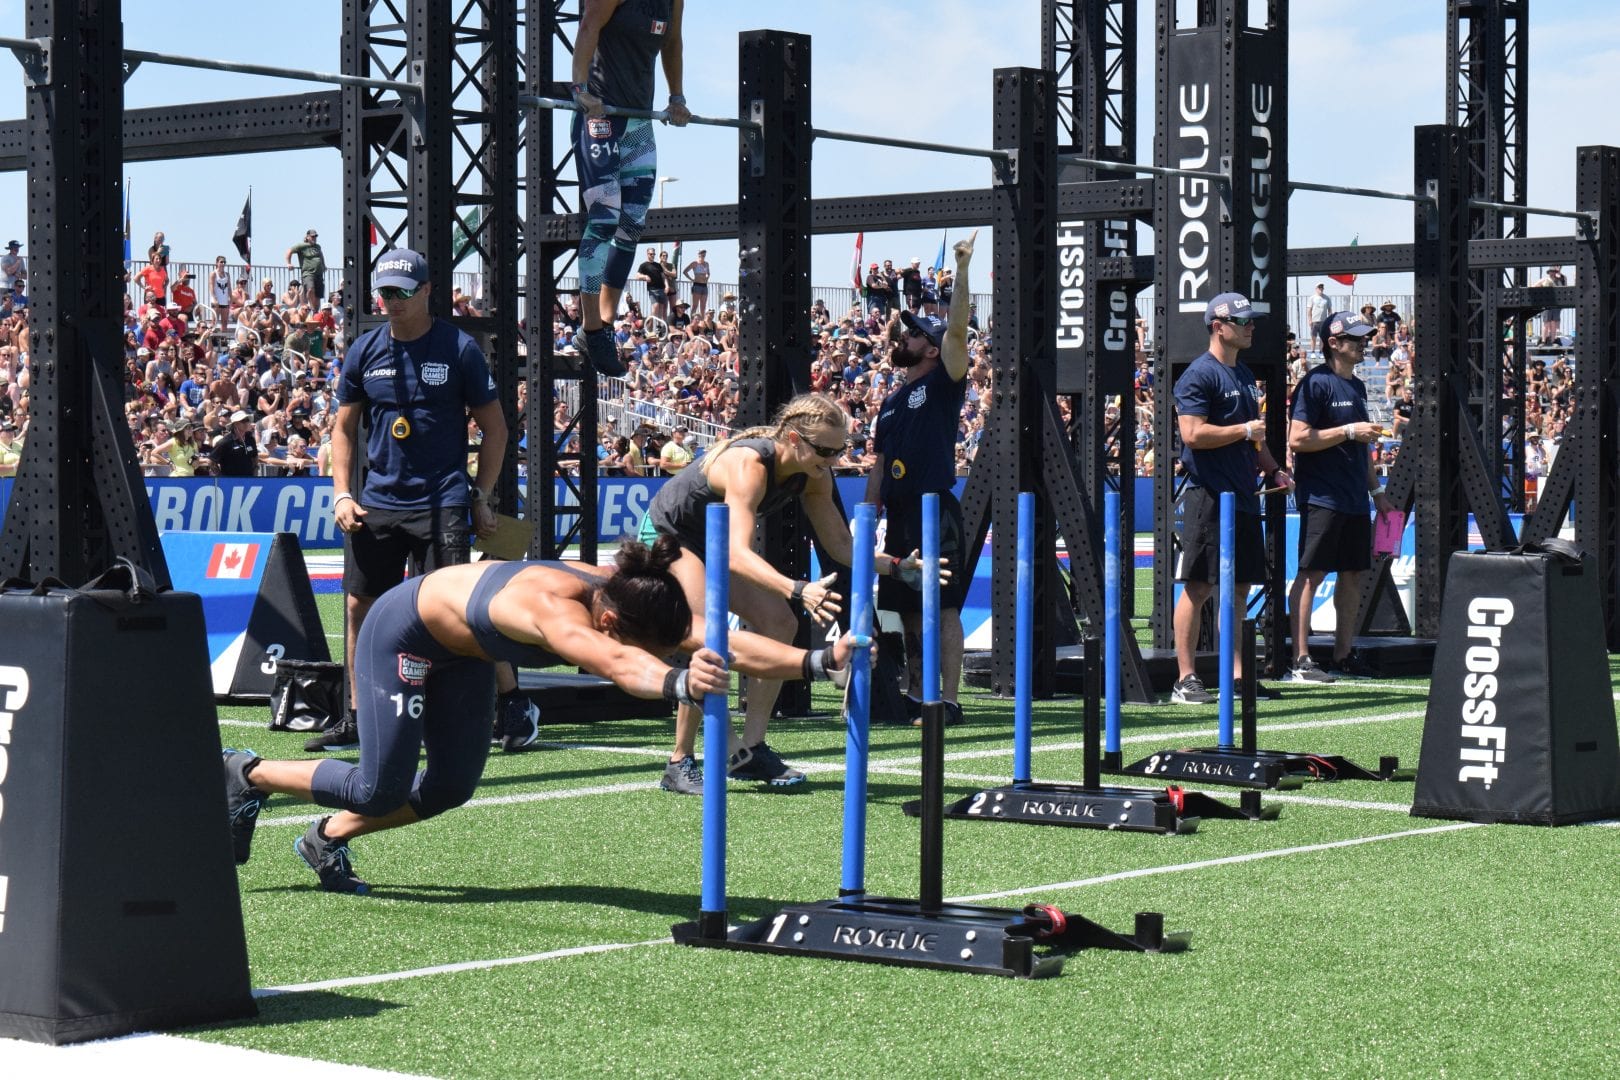 Anna Fragkou completes the Sprint Bicouplet event at the 2019 CrossFit Games.